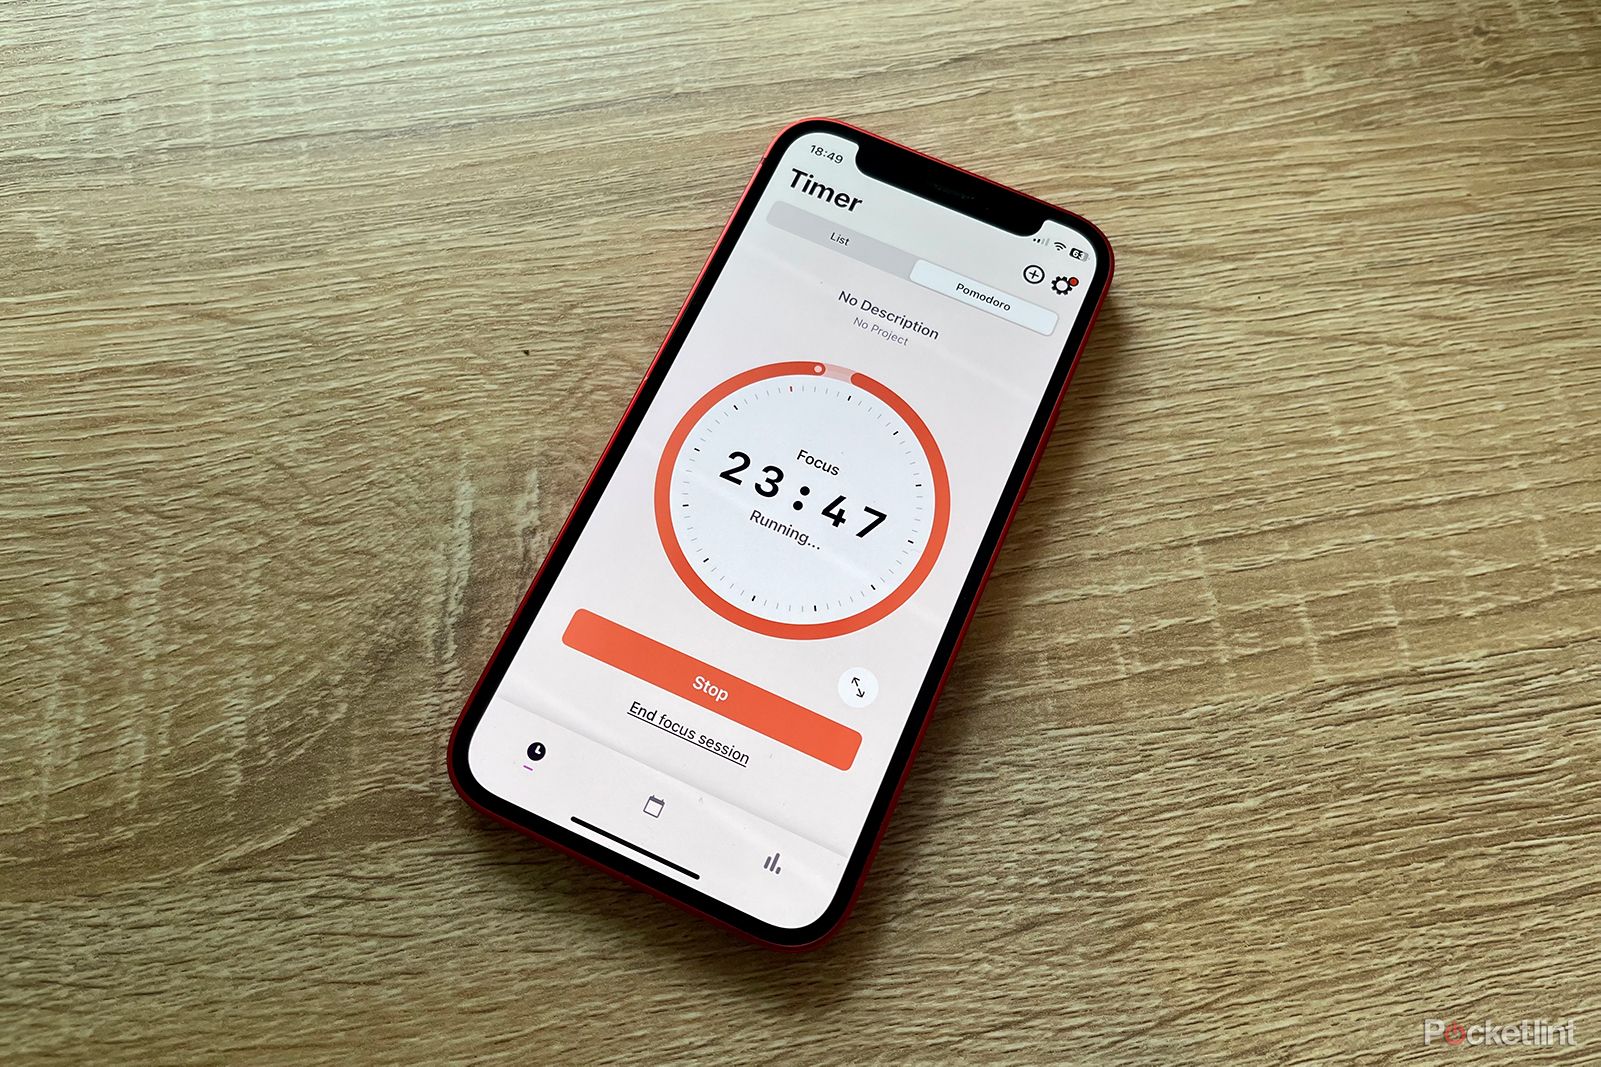 pomodoro timer in toggl track on an iphone